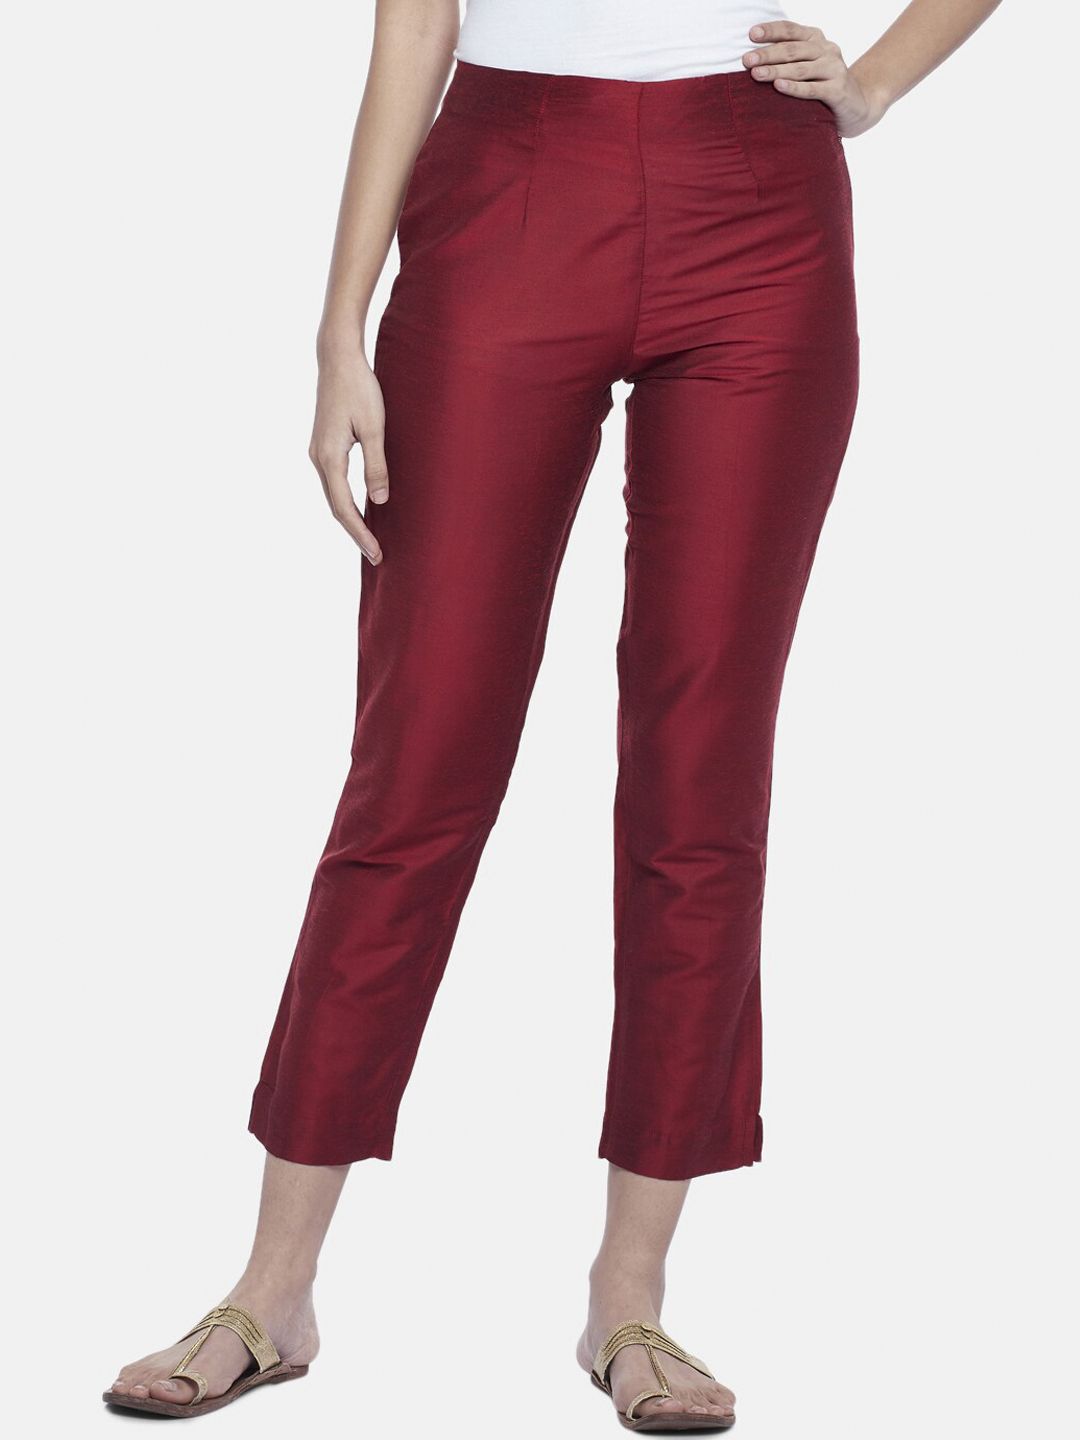 RANGMANCH BY PANTALOONS Women Red Solid Trousers Price in India